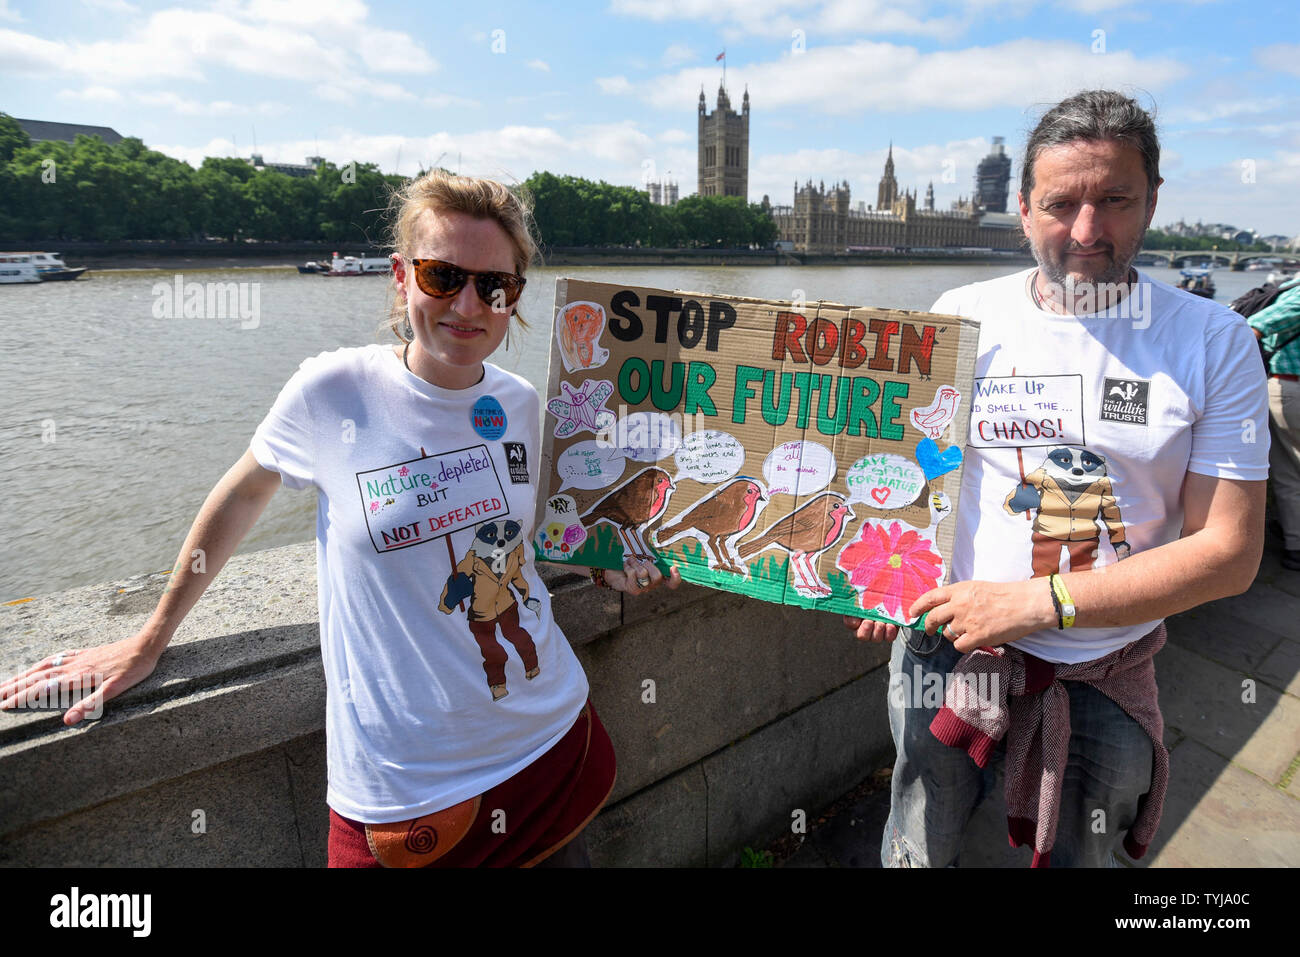 London, UK.  26 June 2019.  Emma and Luke from Worcestershire take part in a 'Time Is Now' mass lobby around Parliament.  Activists are attempting to deliver a message to MPs that to tackle the environmental crisis, a strong Environment Bill is passed that can restore nature, cut plastic pollution and improve air quality.  Similar gatherings are taking place across the UK.  Credit: Stephen Chung / Alamy Live News Stock Photo